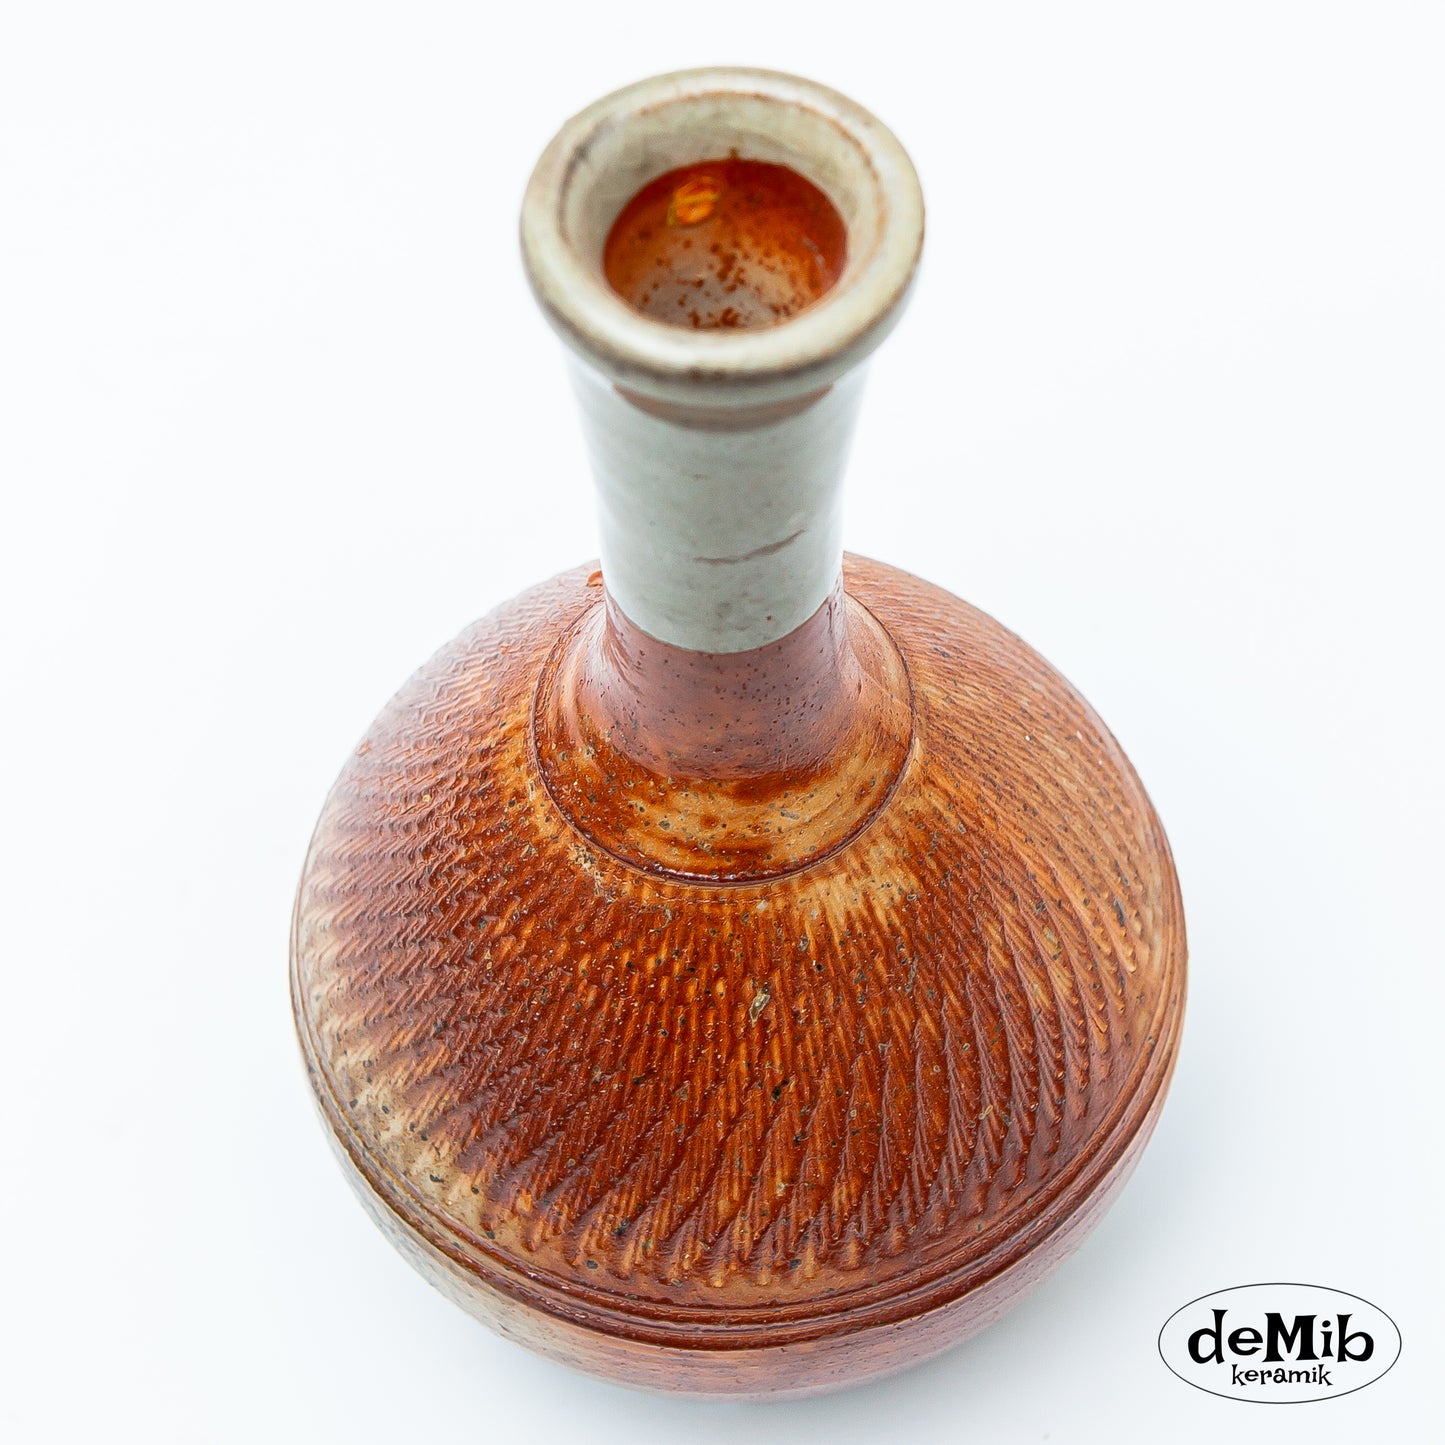 Smal Wood Fired Vase in Two Colors (19 cm)